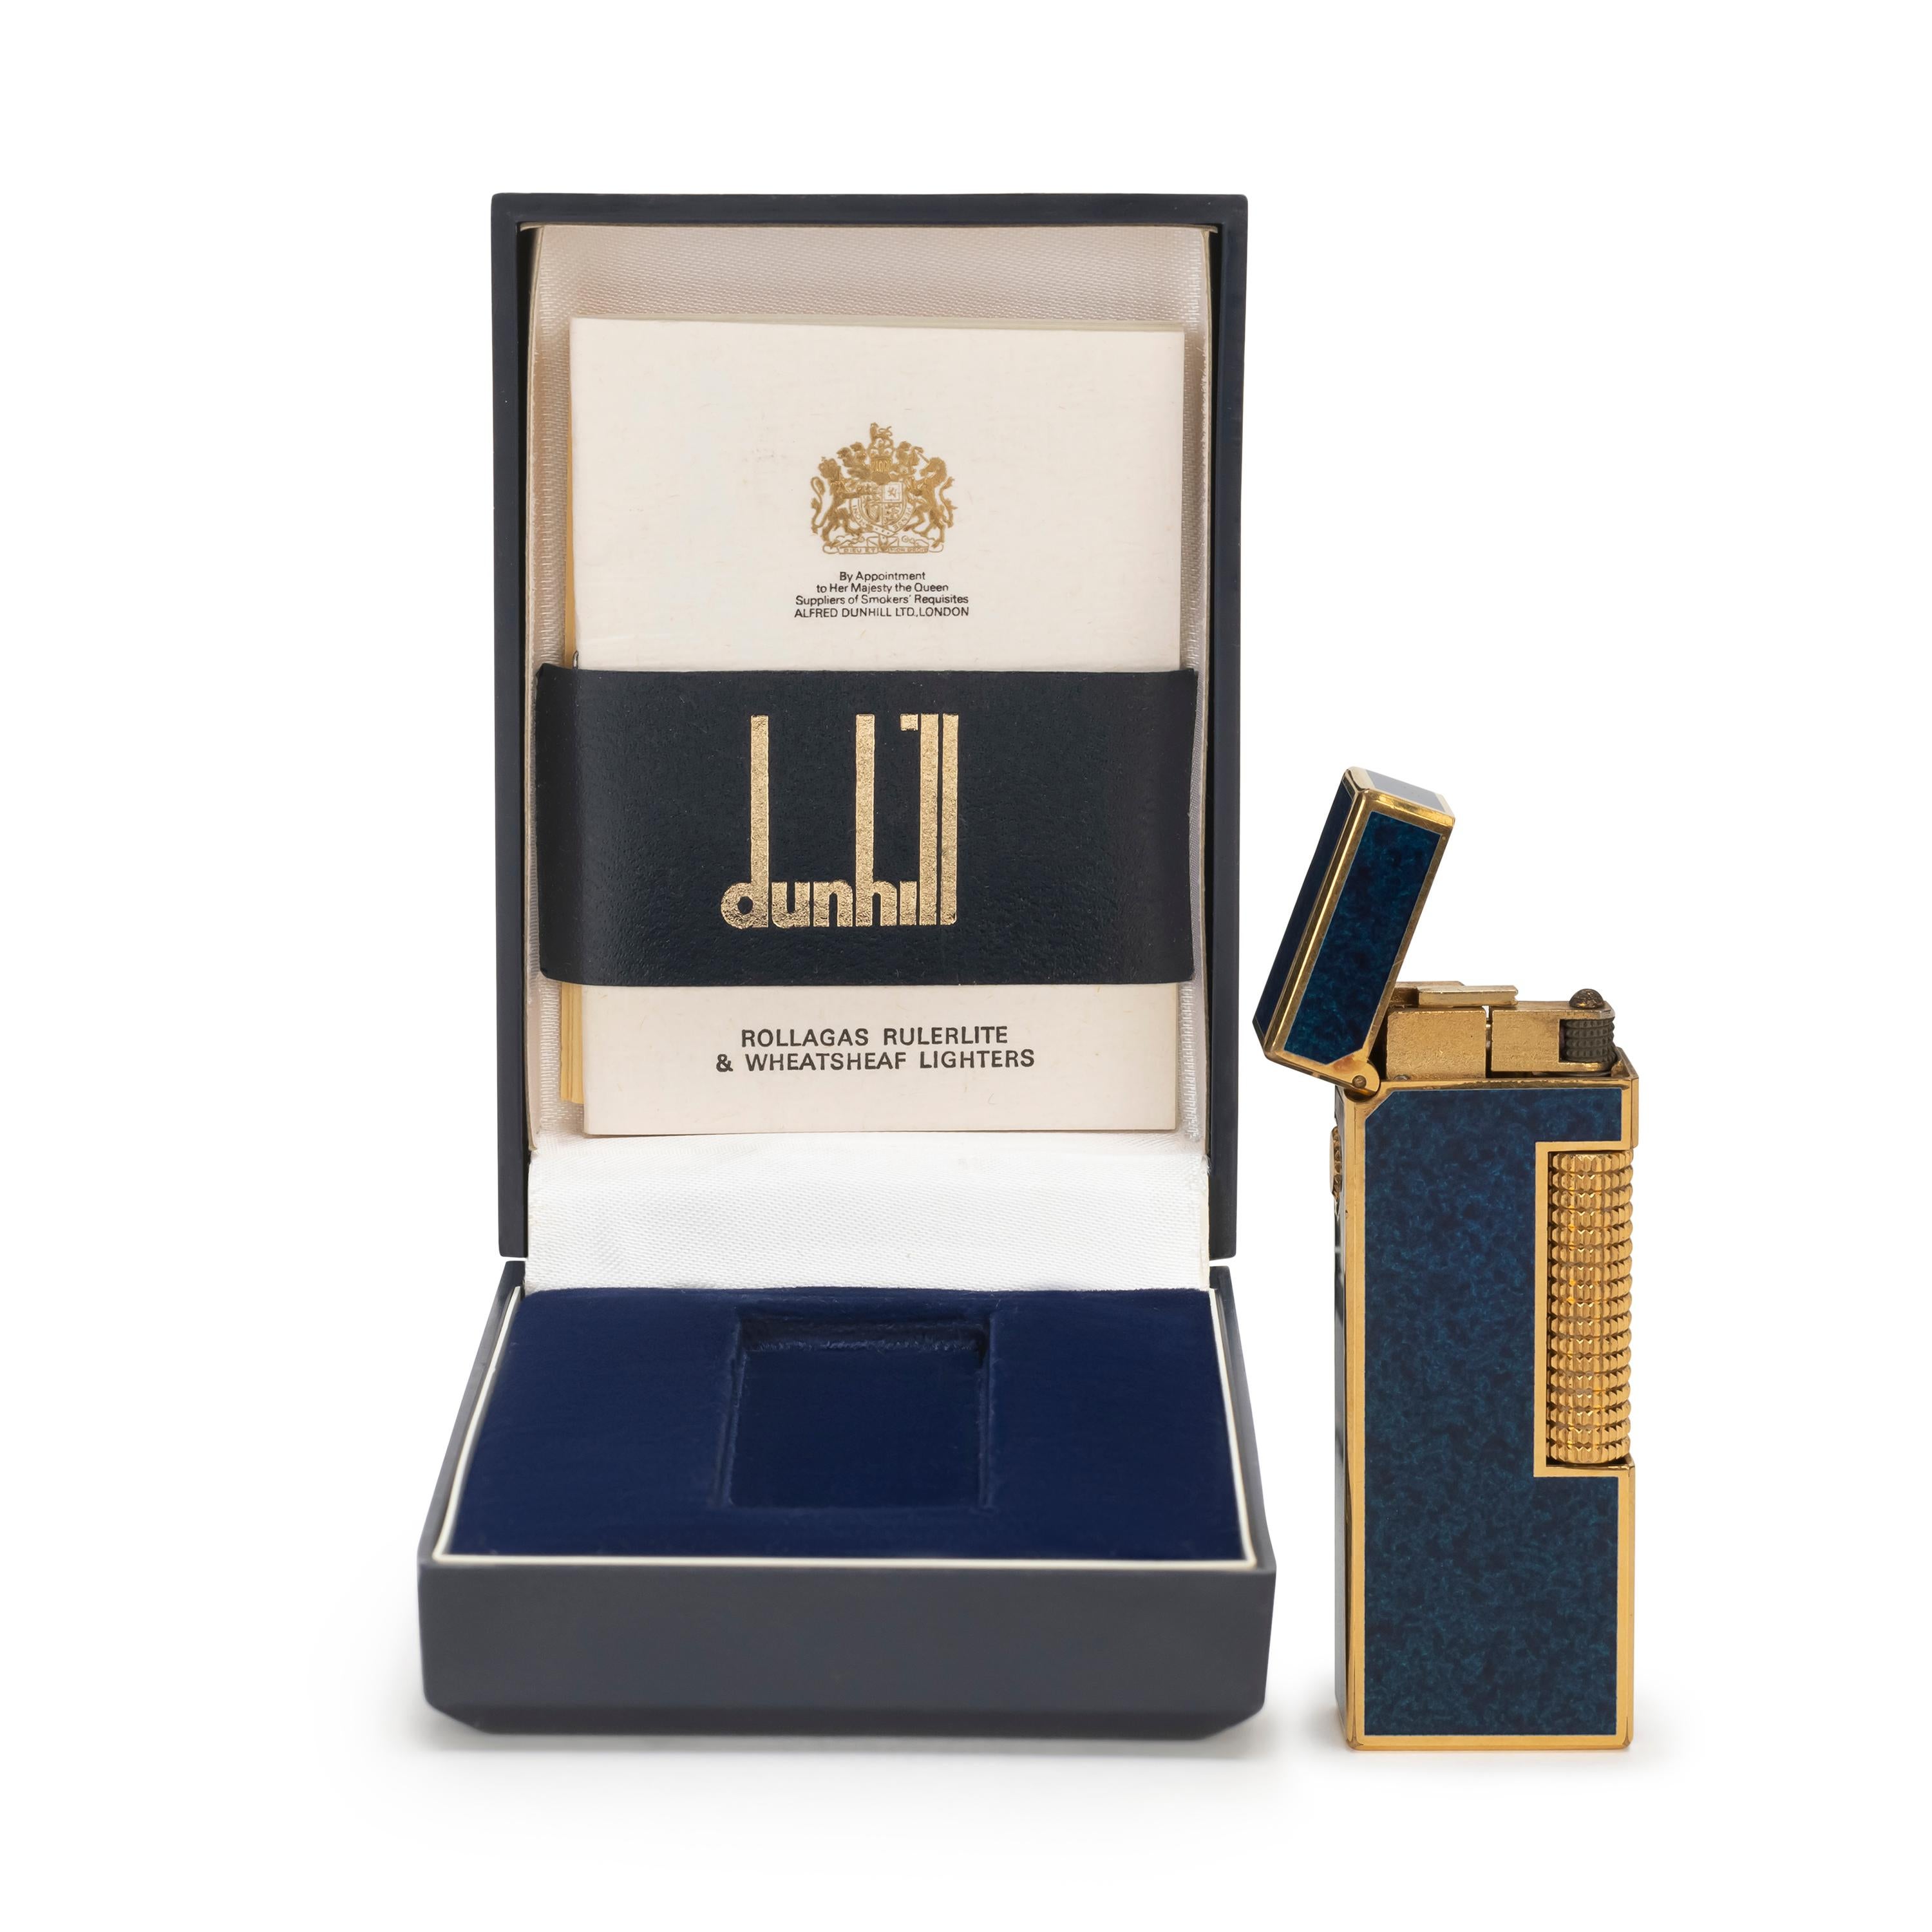 Elegant and Chic Rare Iconic Vintage Dunhill Gold Plated and Dark Blue Lacquer Swiss Made Lighter.
This 1970s Vintage Dunhill is gold plated and has a dark Blue lacquer Swiss Made lighter In mint condition.
Works perfectly. 
18K gold plating 
Iconic